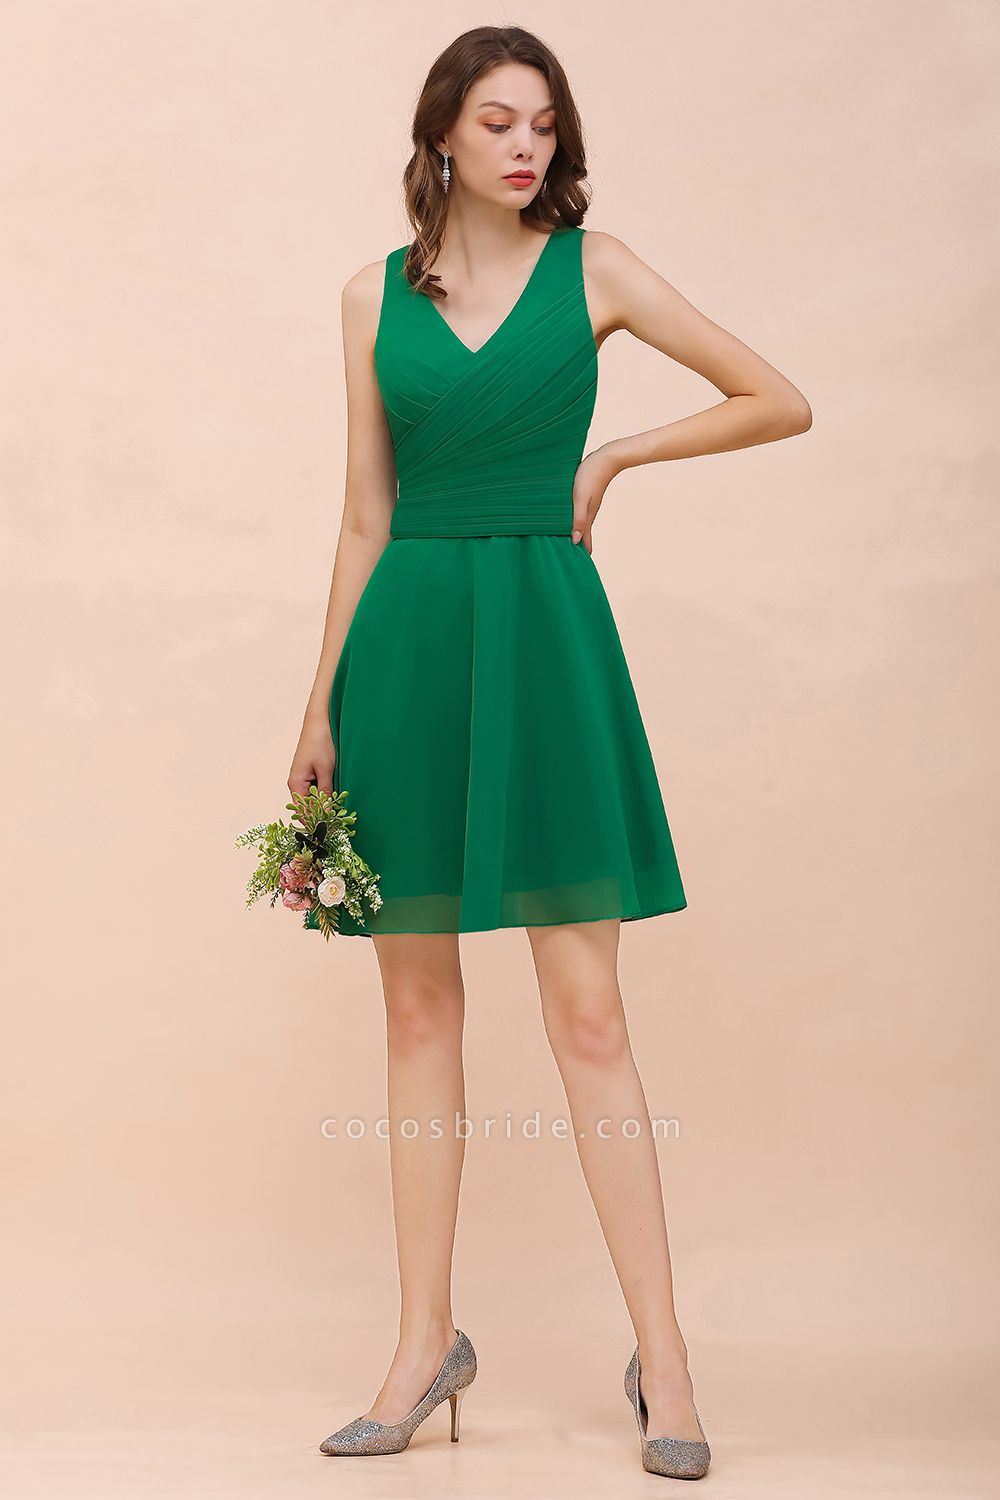 Vintage V-neck Wide Straps A-line Chiffon Short Bridesmaid Dress With Ruched